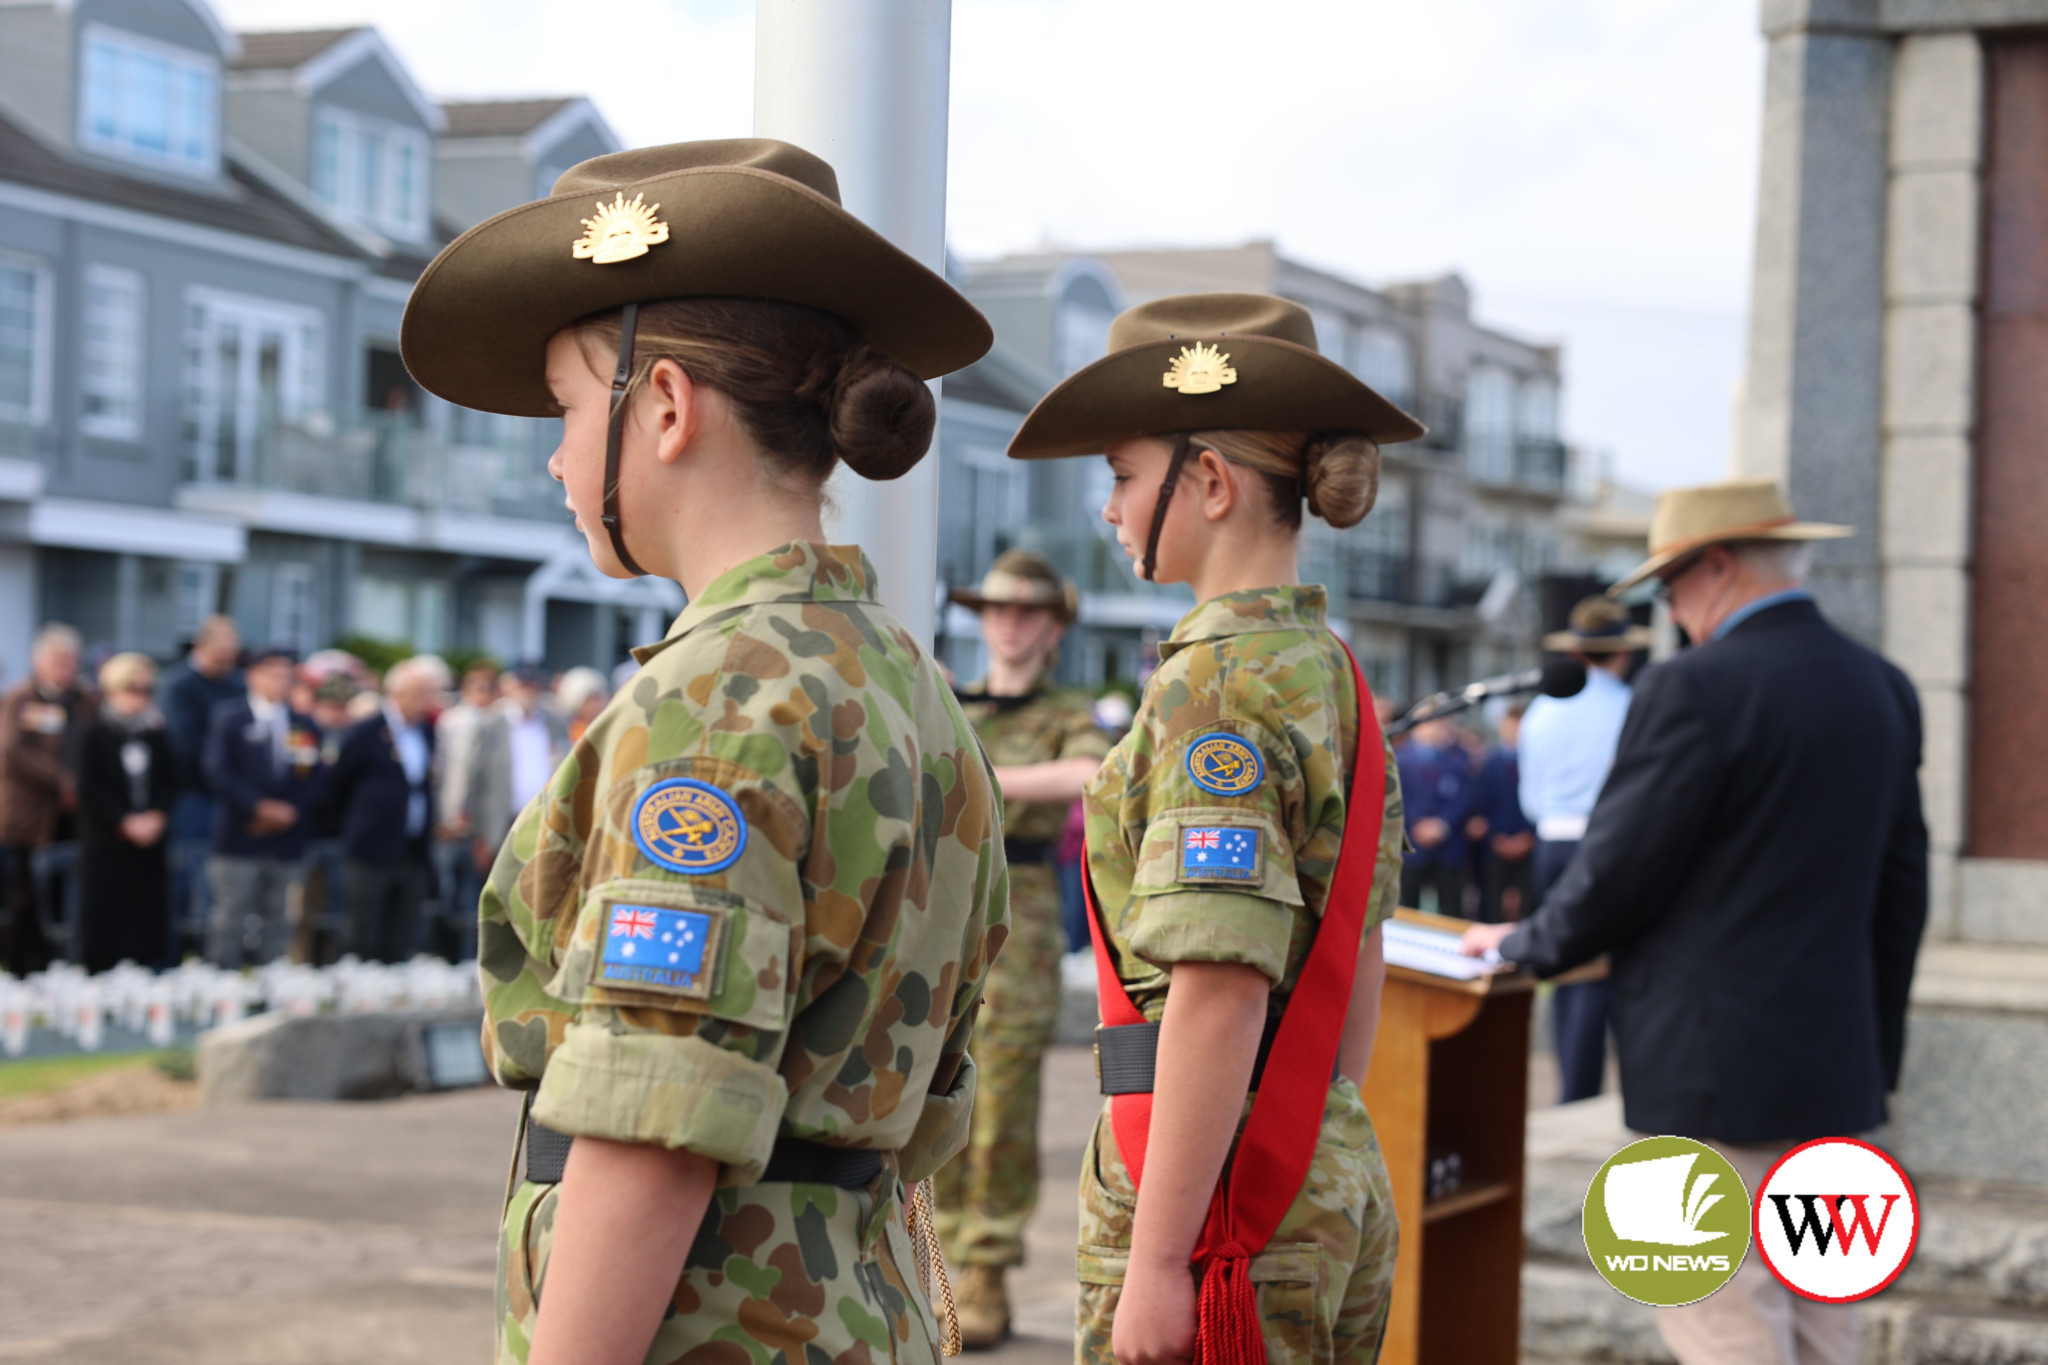 The Australian Army Cadets played their role in yesterday’s Anzac Day service in Warrnambool where the young, the old and everyone in between were united in remembrance. Hundreds gathered in Warrnambool and at various locations across the district to pay their respects to the fallen, and to those who continue to serve our nation.